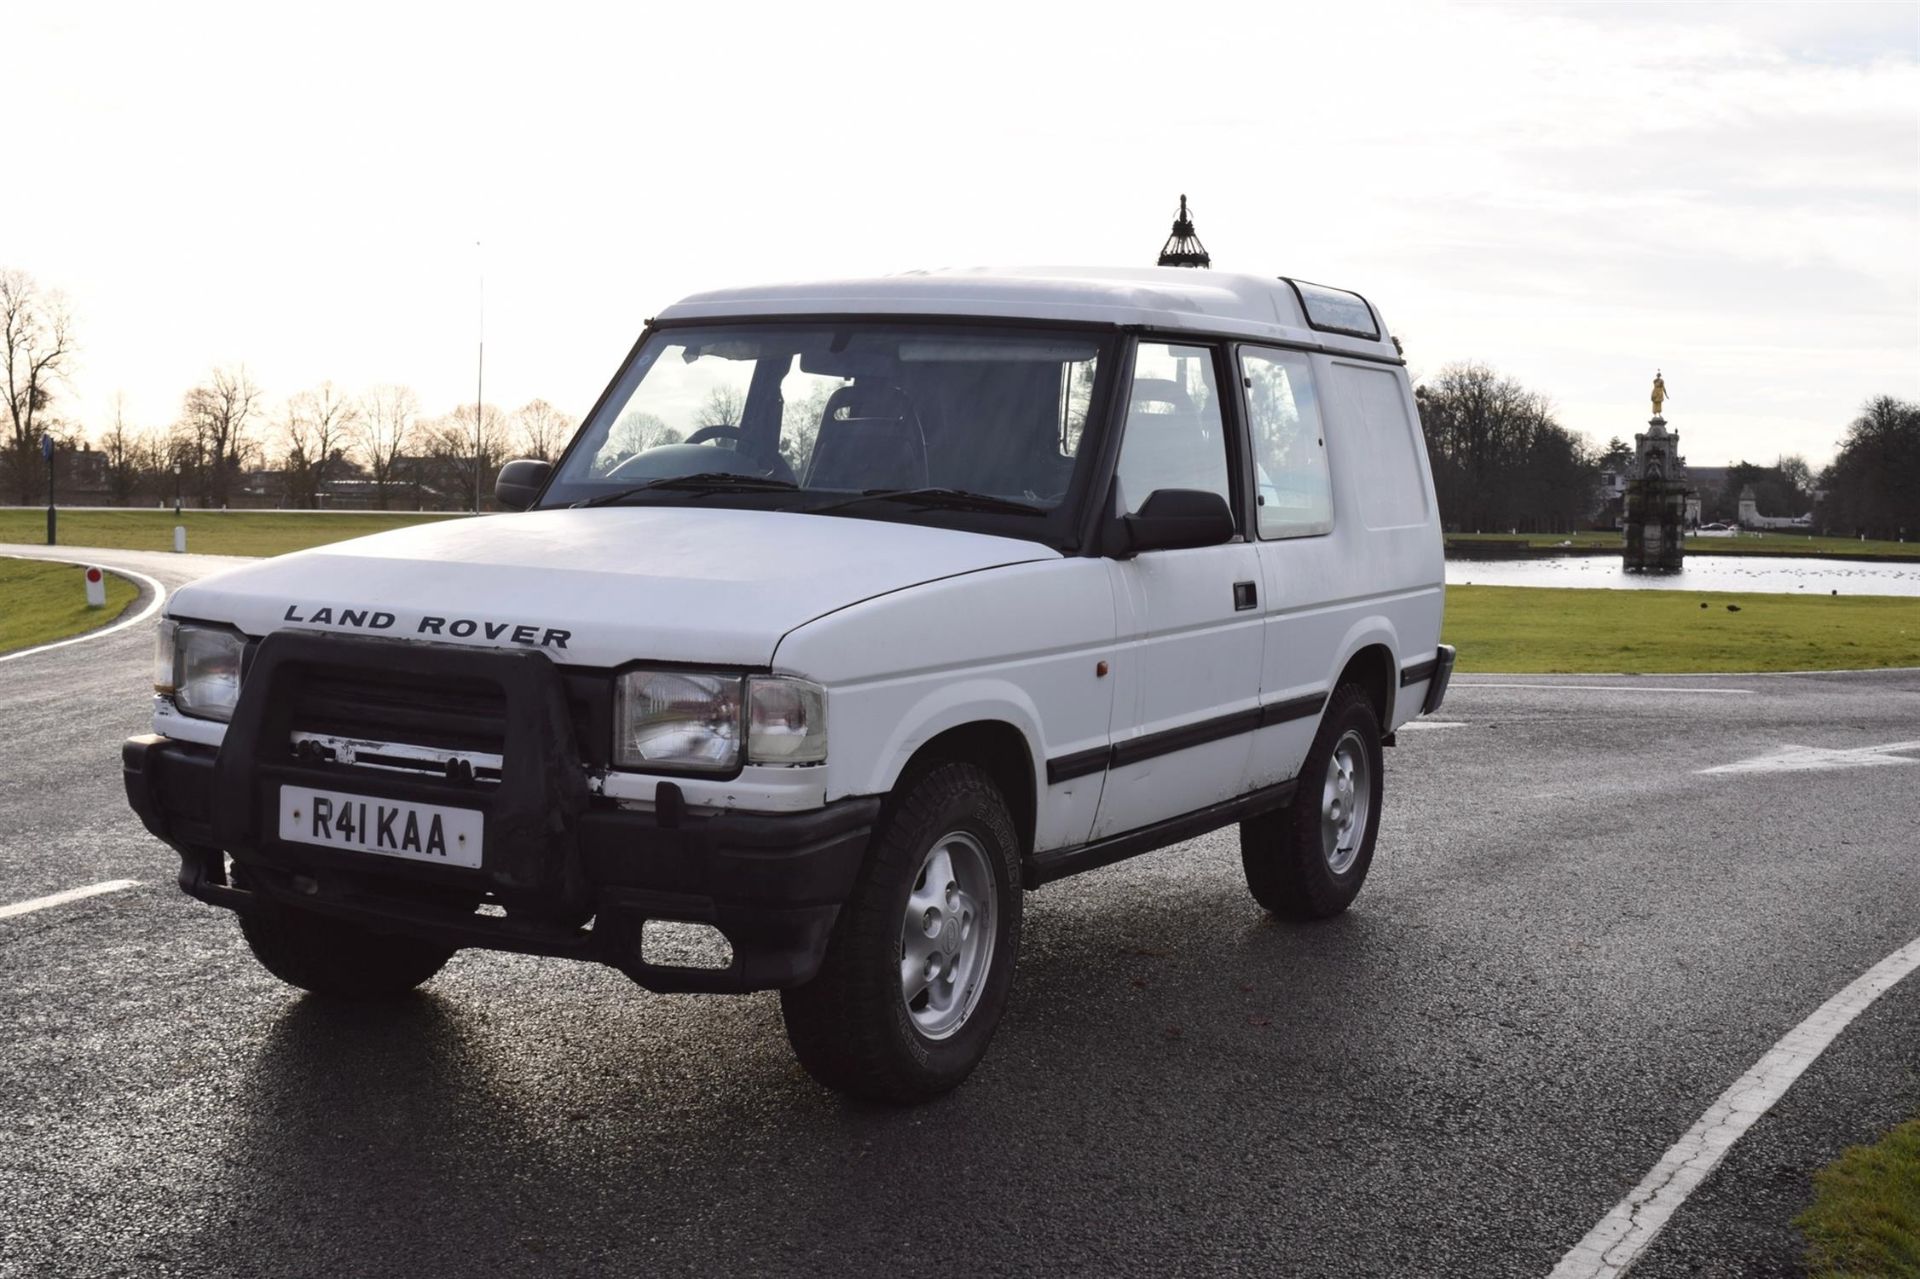 1998 Land Rover Discovery 2-Door R41 KAA. 2-door Land Rover Discovery 300 TDI, which was first - Image 7 of 41